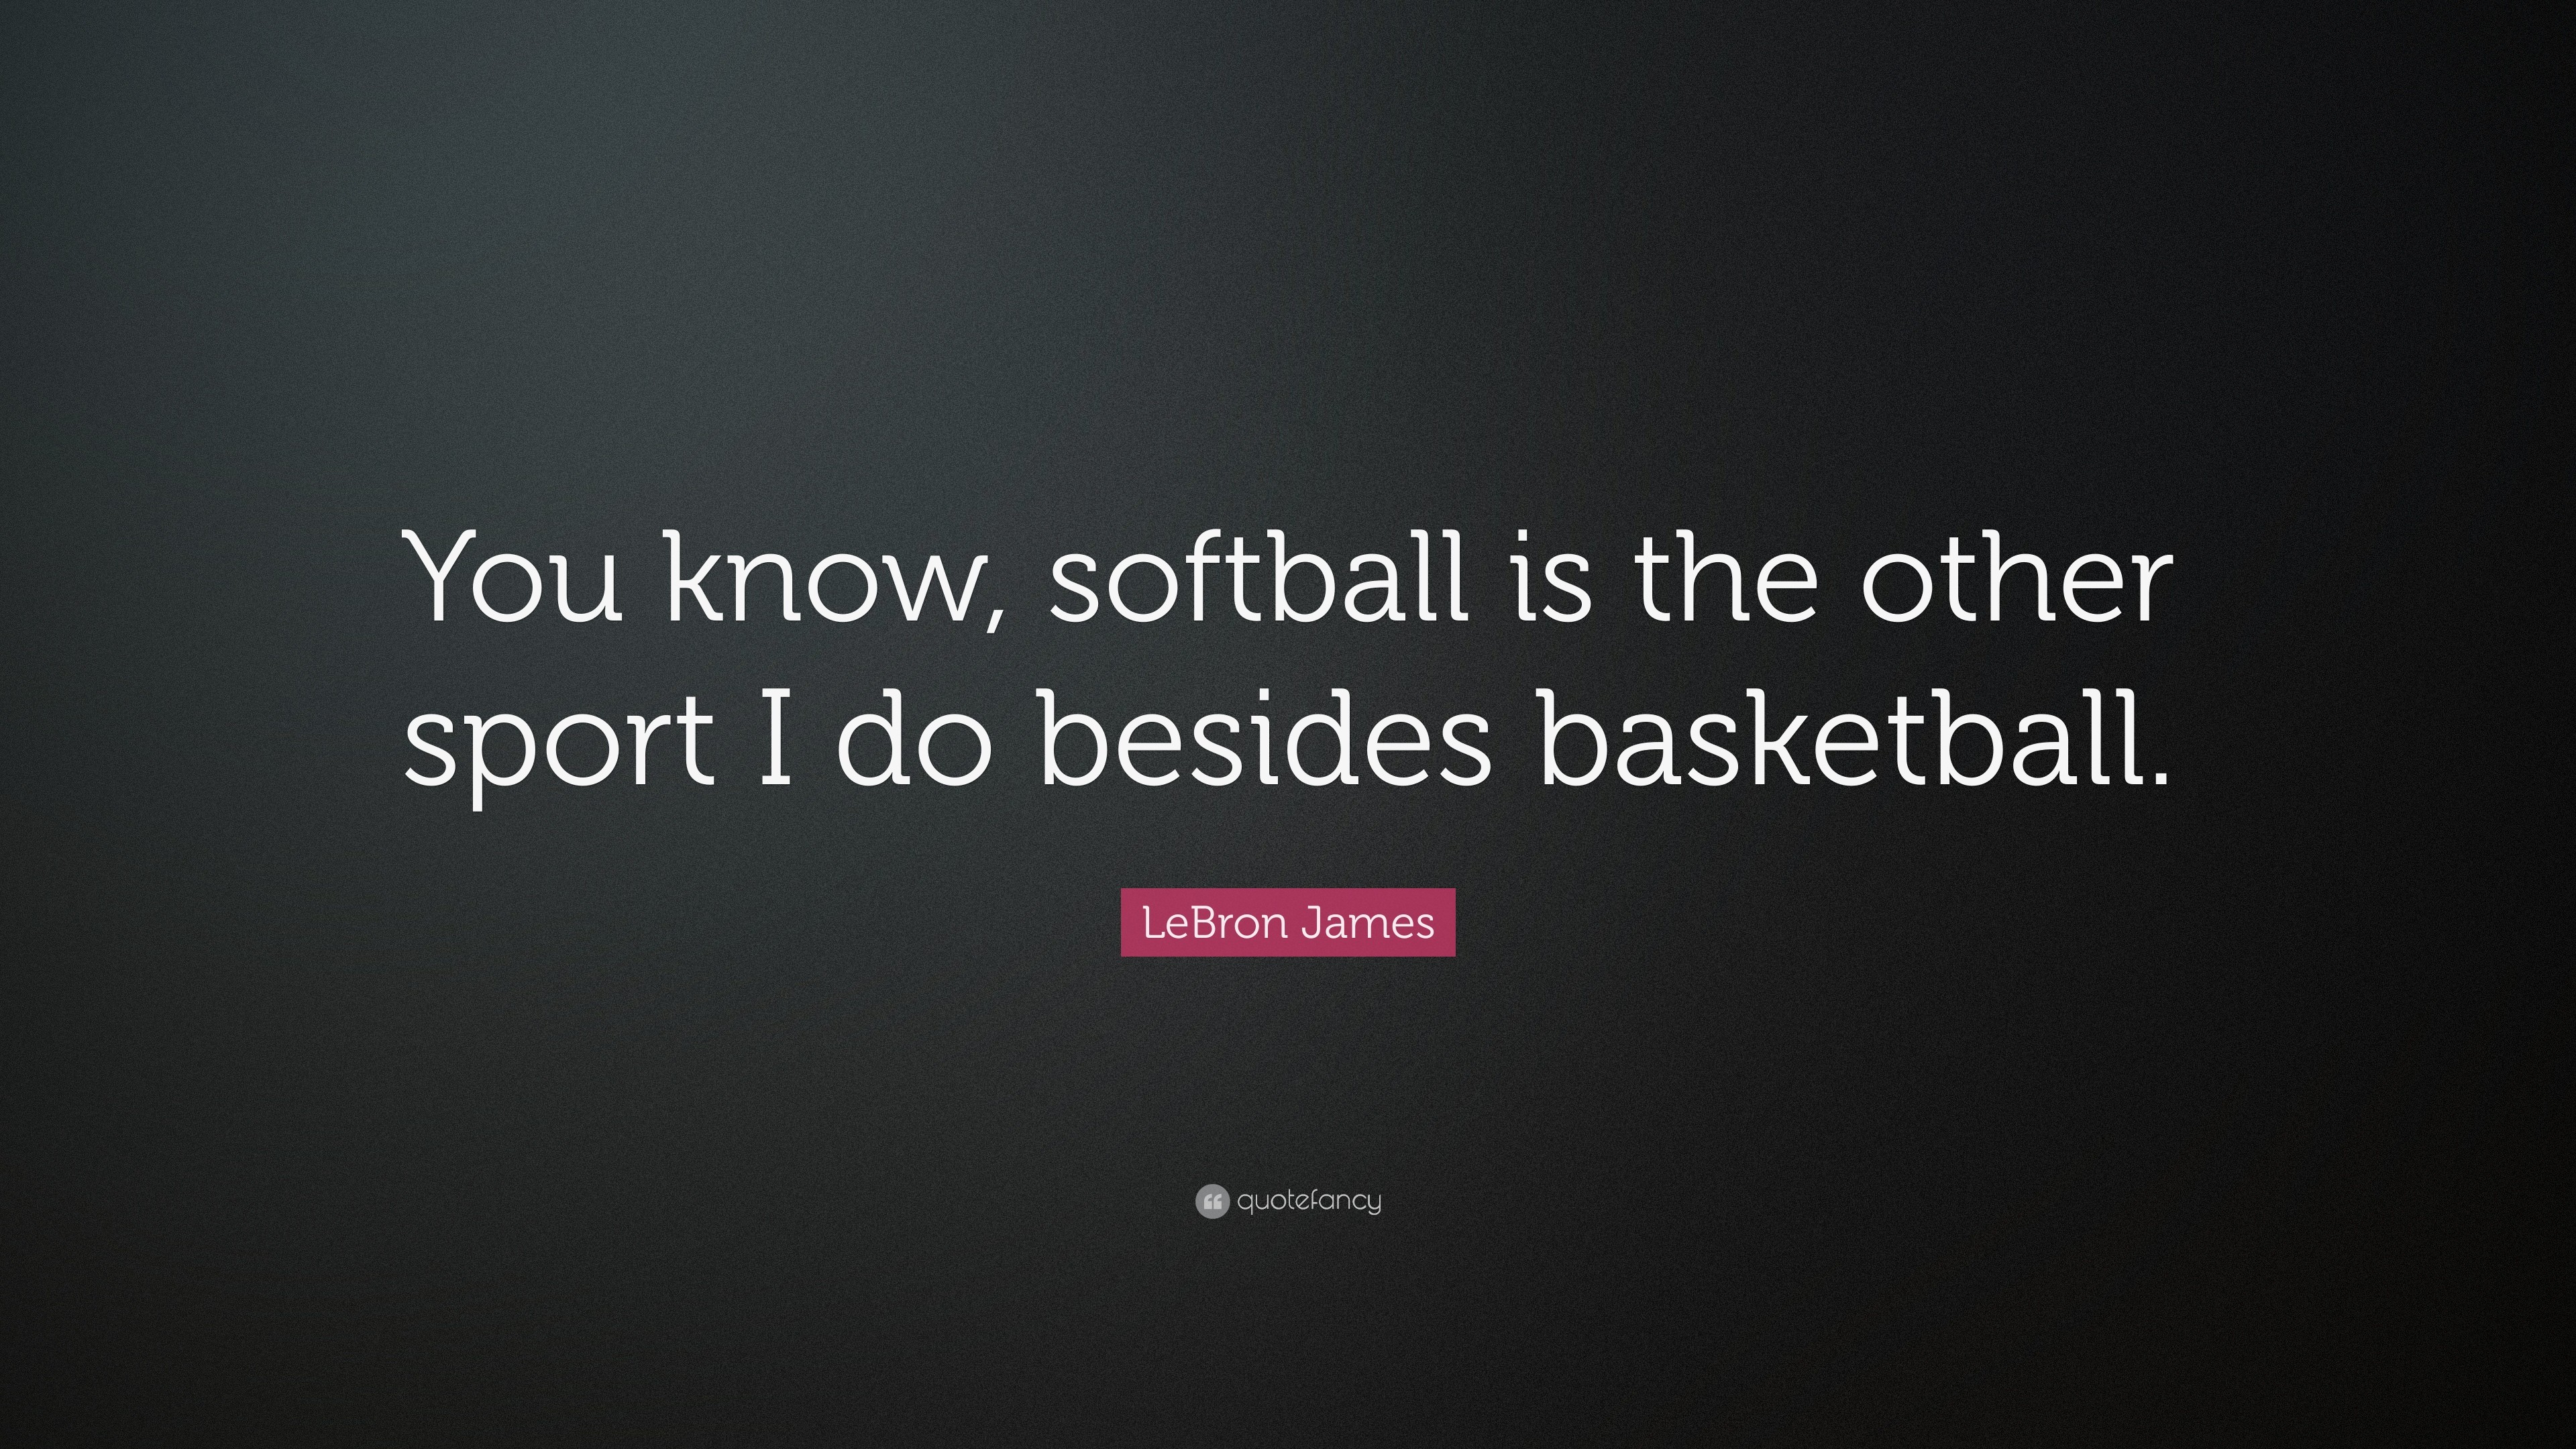 3840x2160 LeBron James Quote: “You know, softball is the other sport I do besides